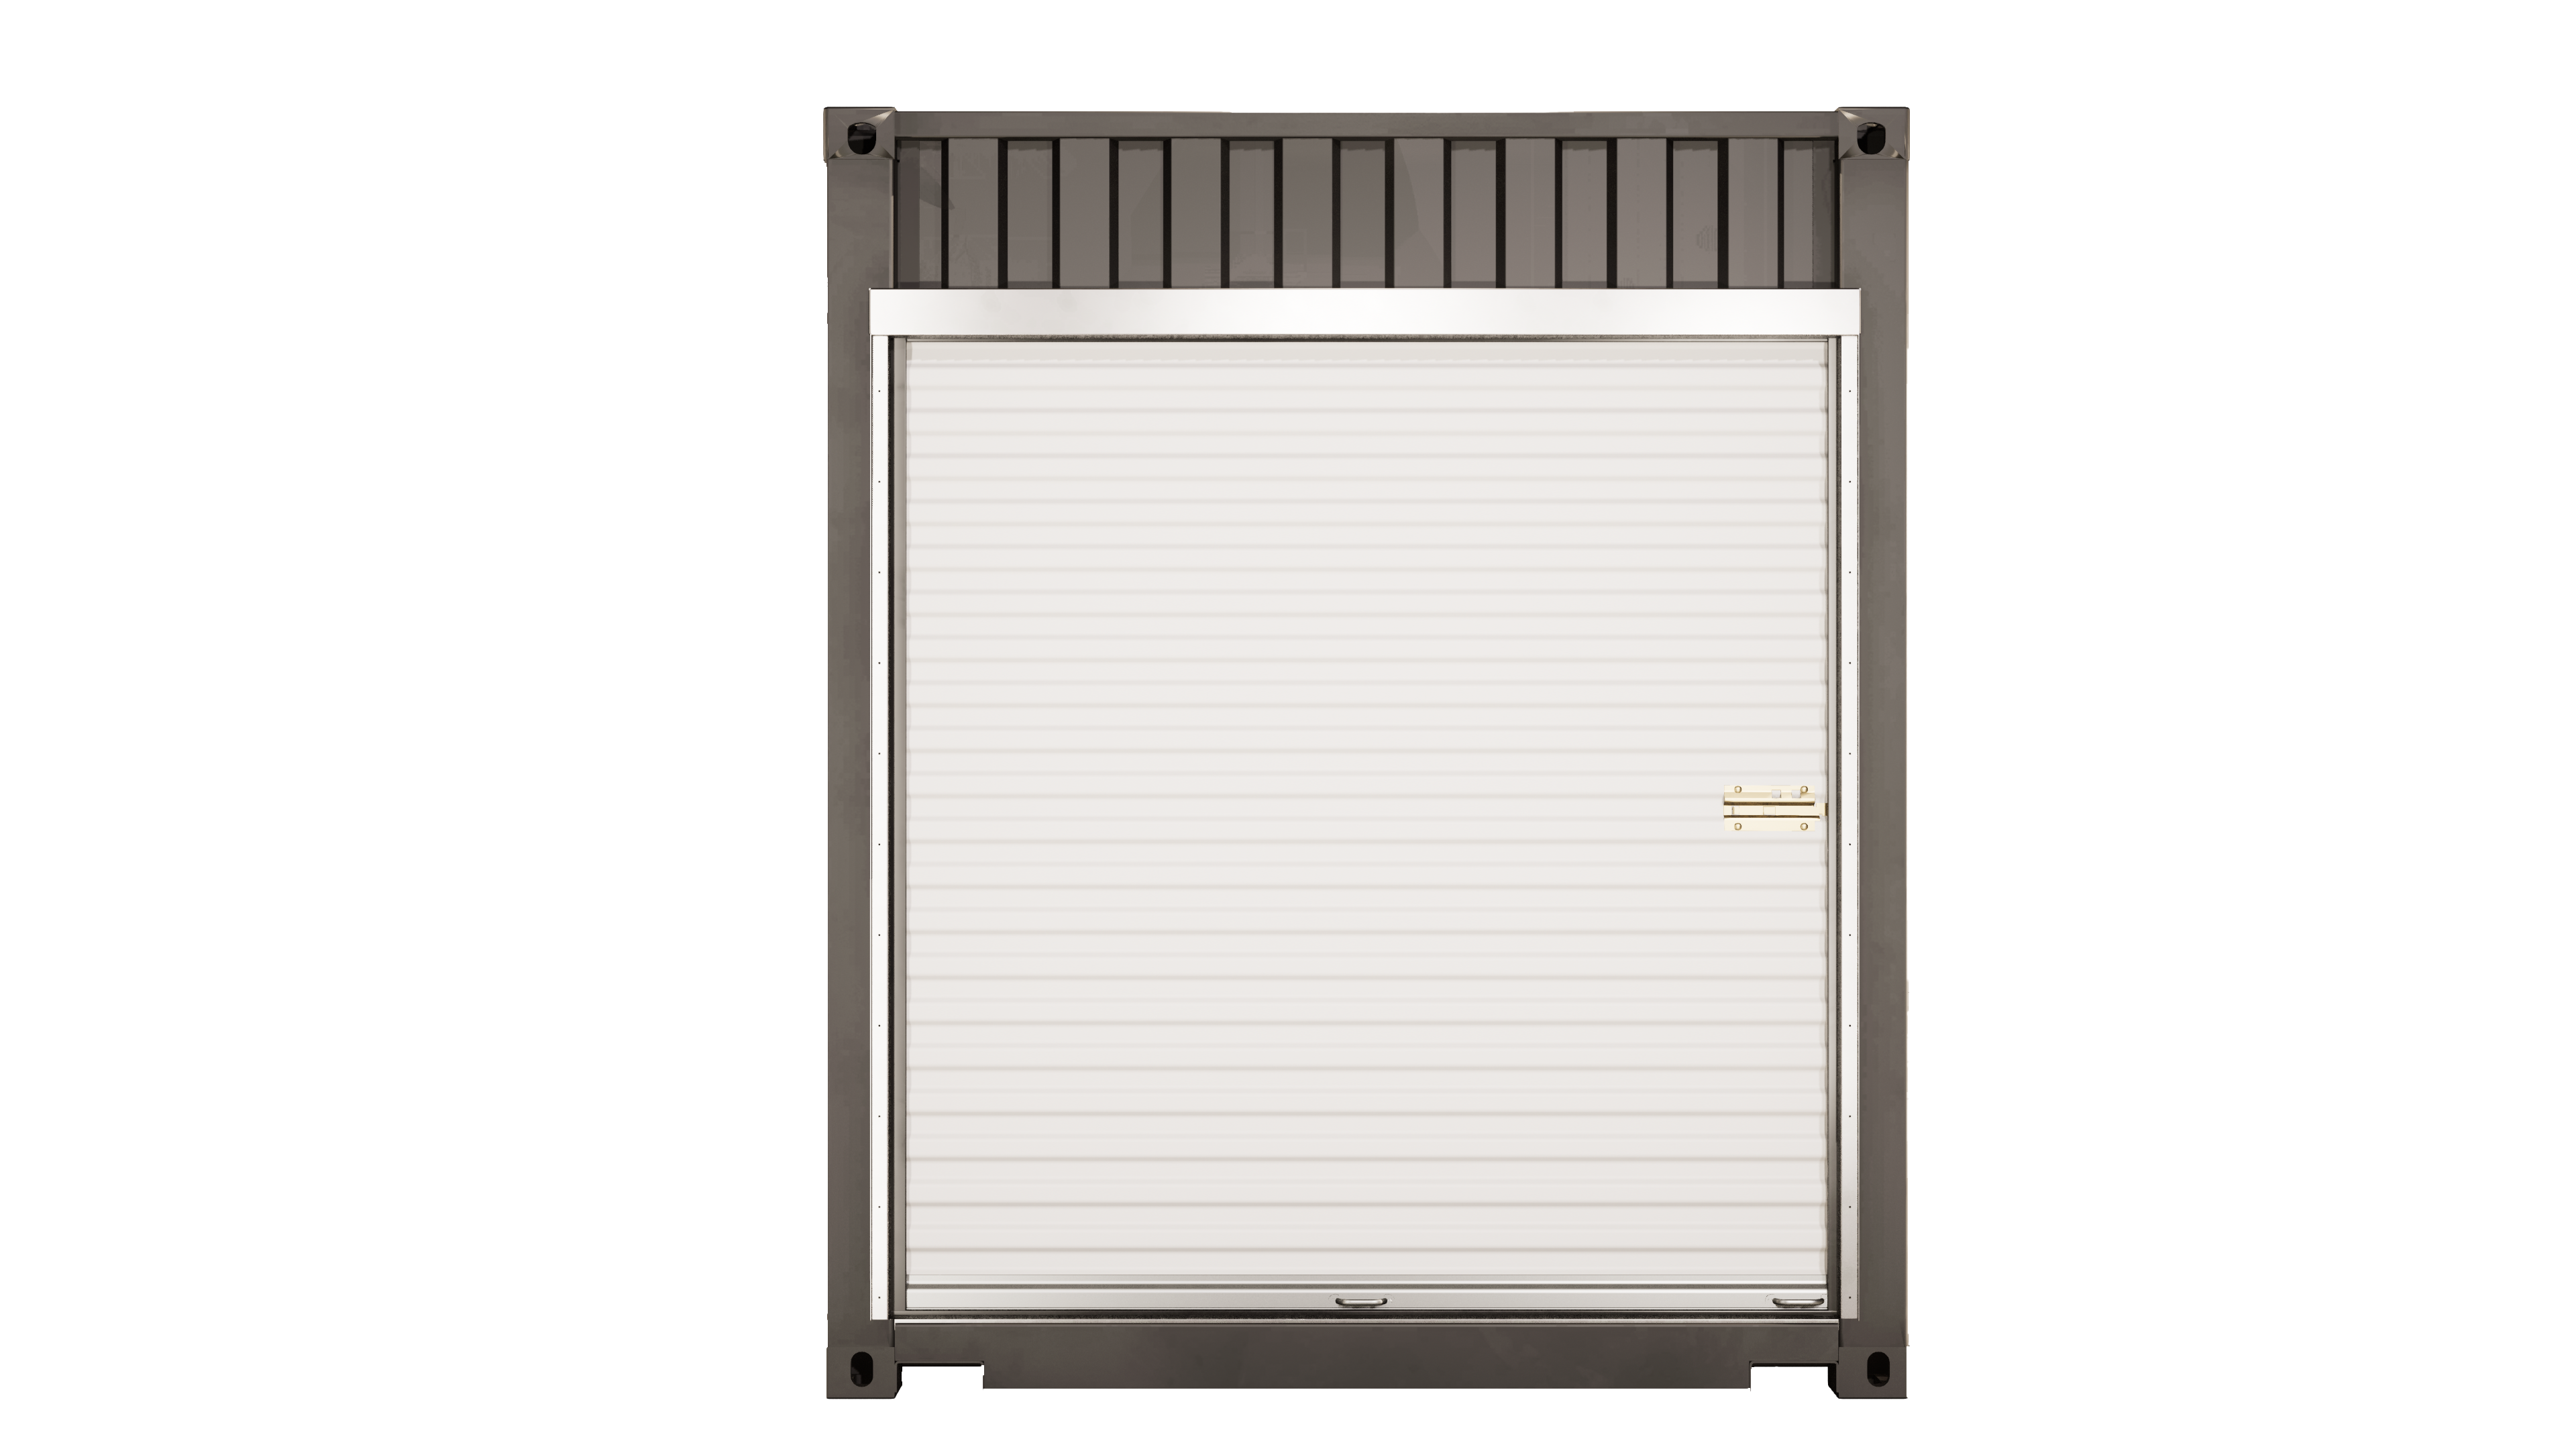 High Cube (9'6" Tall) End Wall Galvanized RUD Framing Kit (7' x 7'3") - Door Not Included (Please contact us before placing order so we can provide accurate shipping quote)